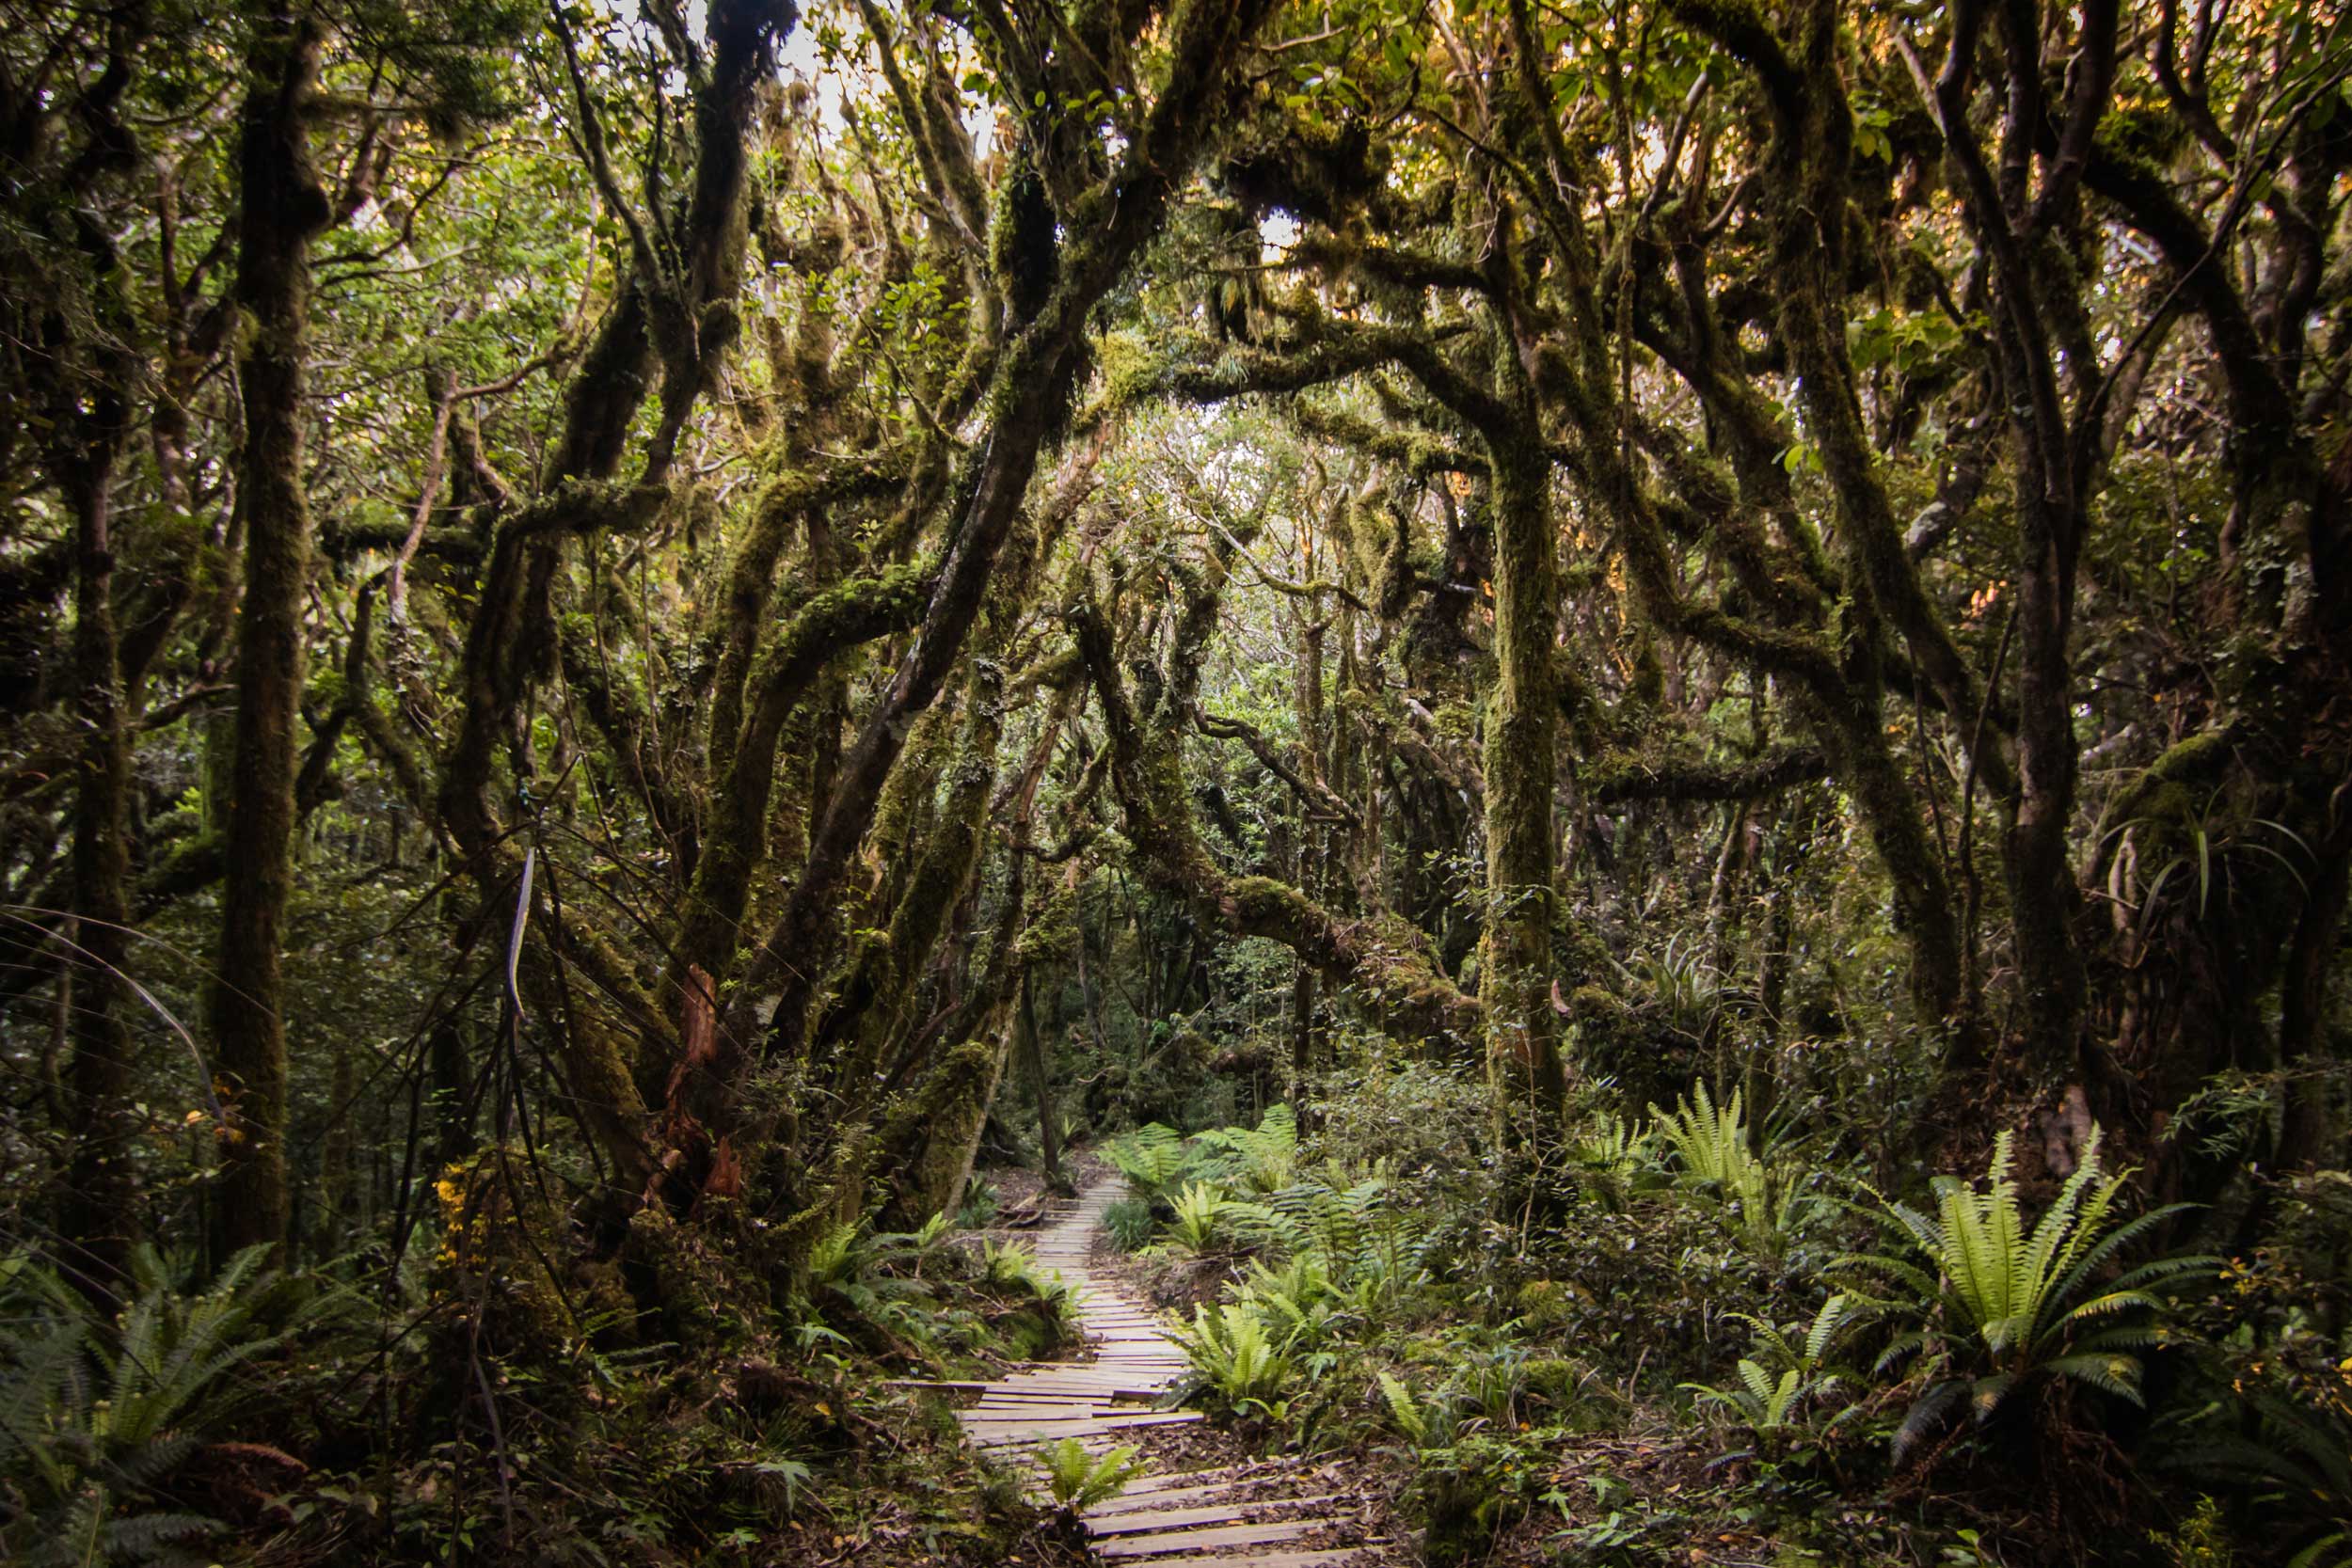 The gnarled trunks and twisted, moss-covered branches give Egmont National Park its moniker of the 'goblin forest'. Photo by Rebecca Teng